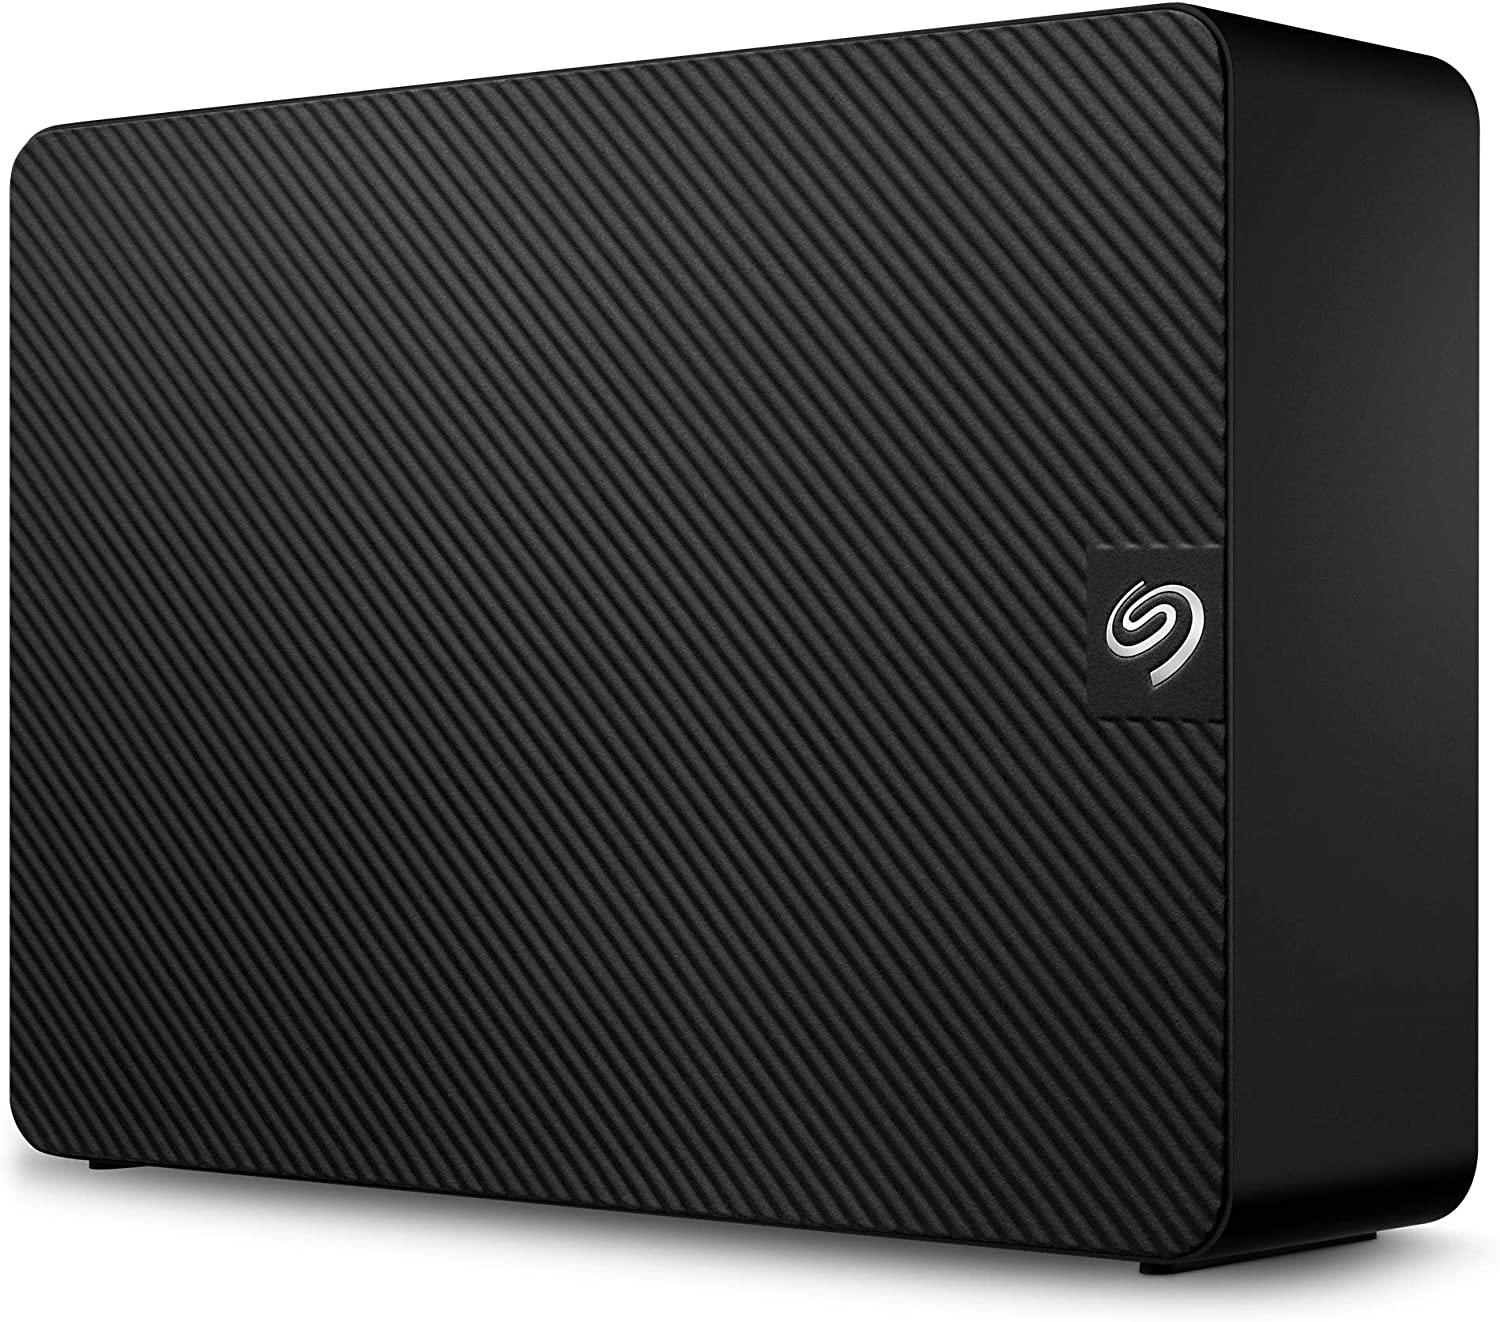 16TB Seagate Expansion USB 3.0 External Hard Drive w/ Rescue Data Recovery Services $230 + Free Shipping